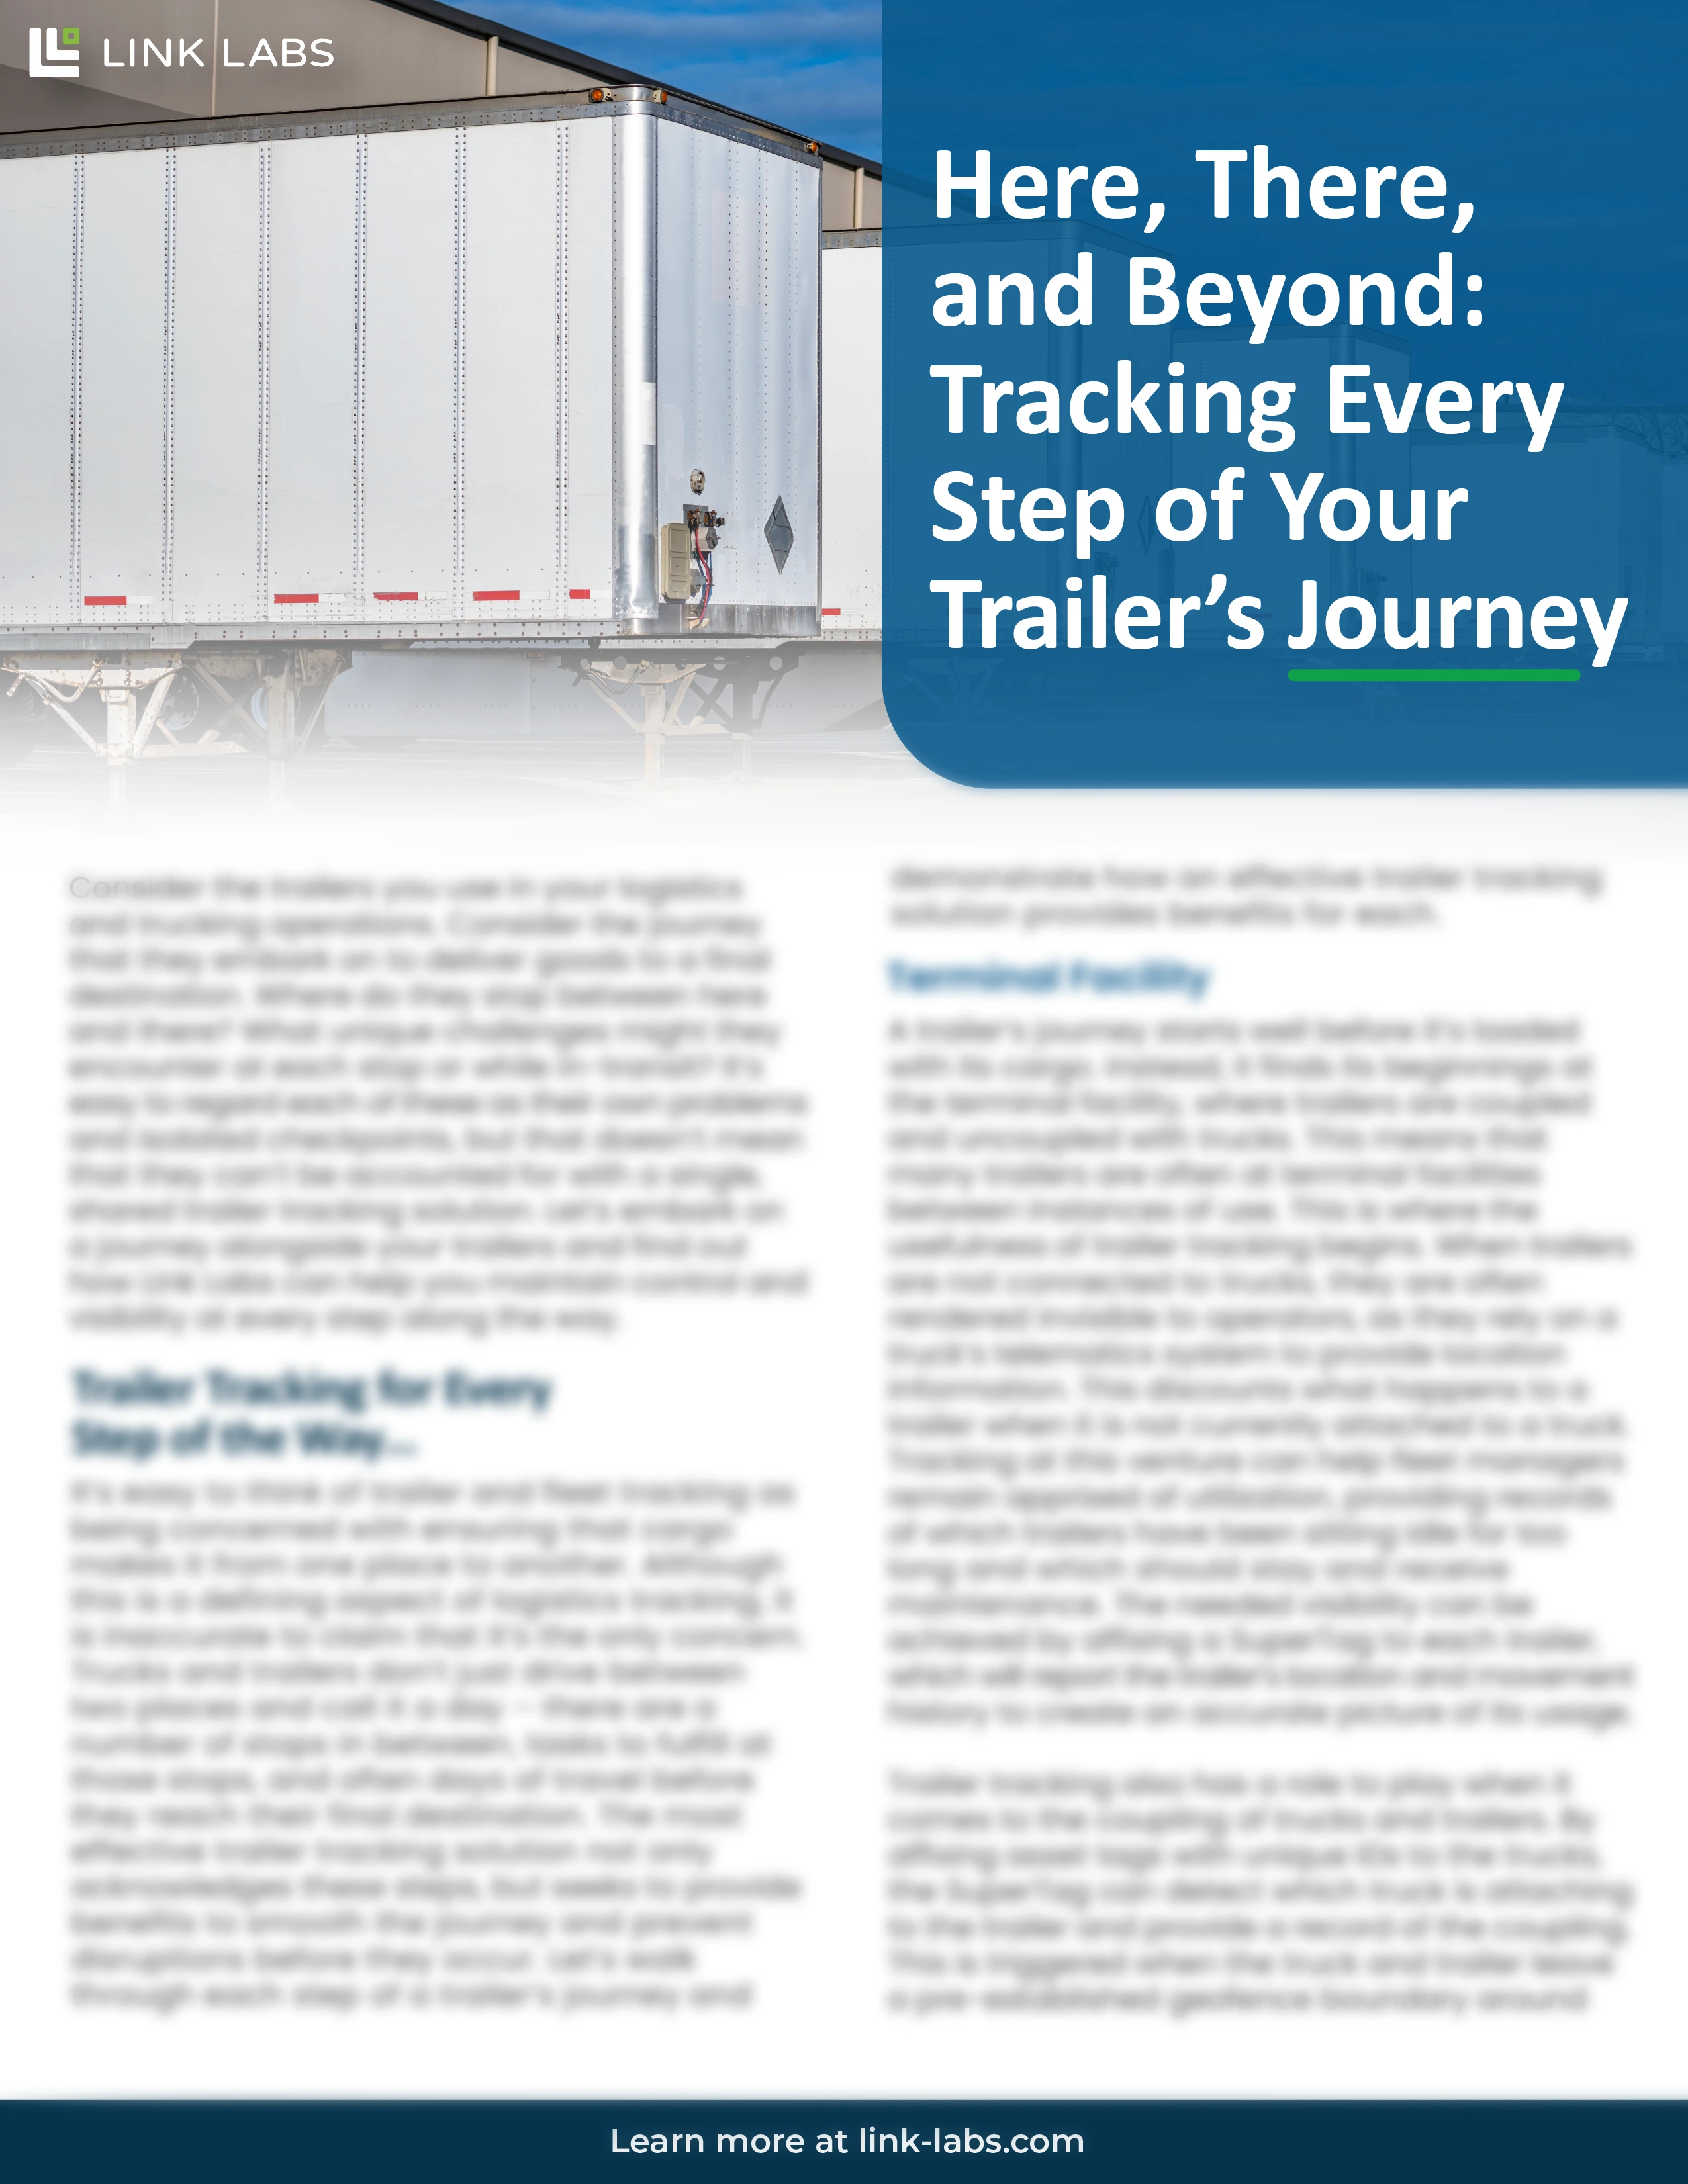 Here, There, and Beyond: Tracking Every Step of Your Trailer’s Journey White Paper